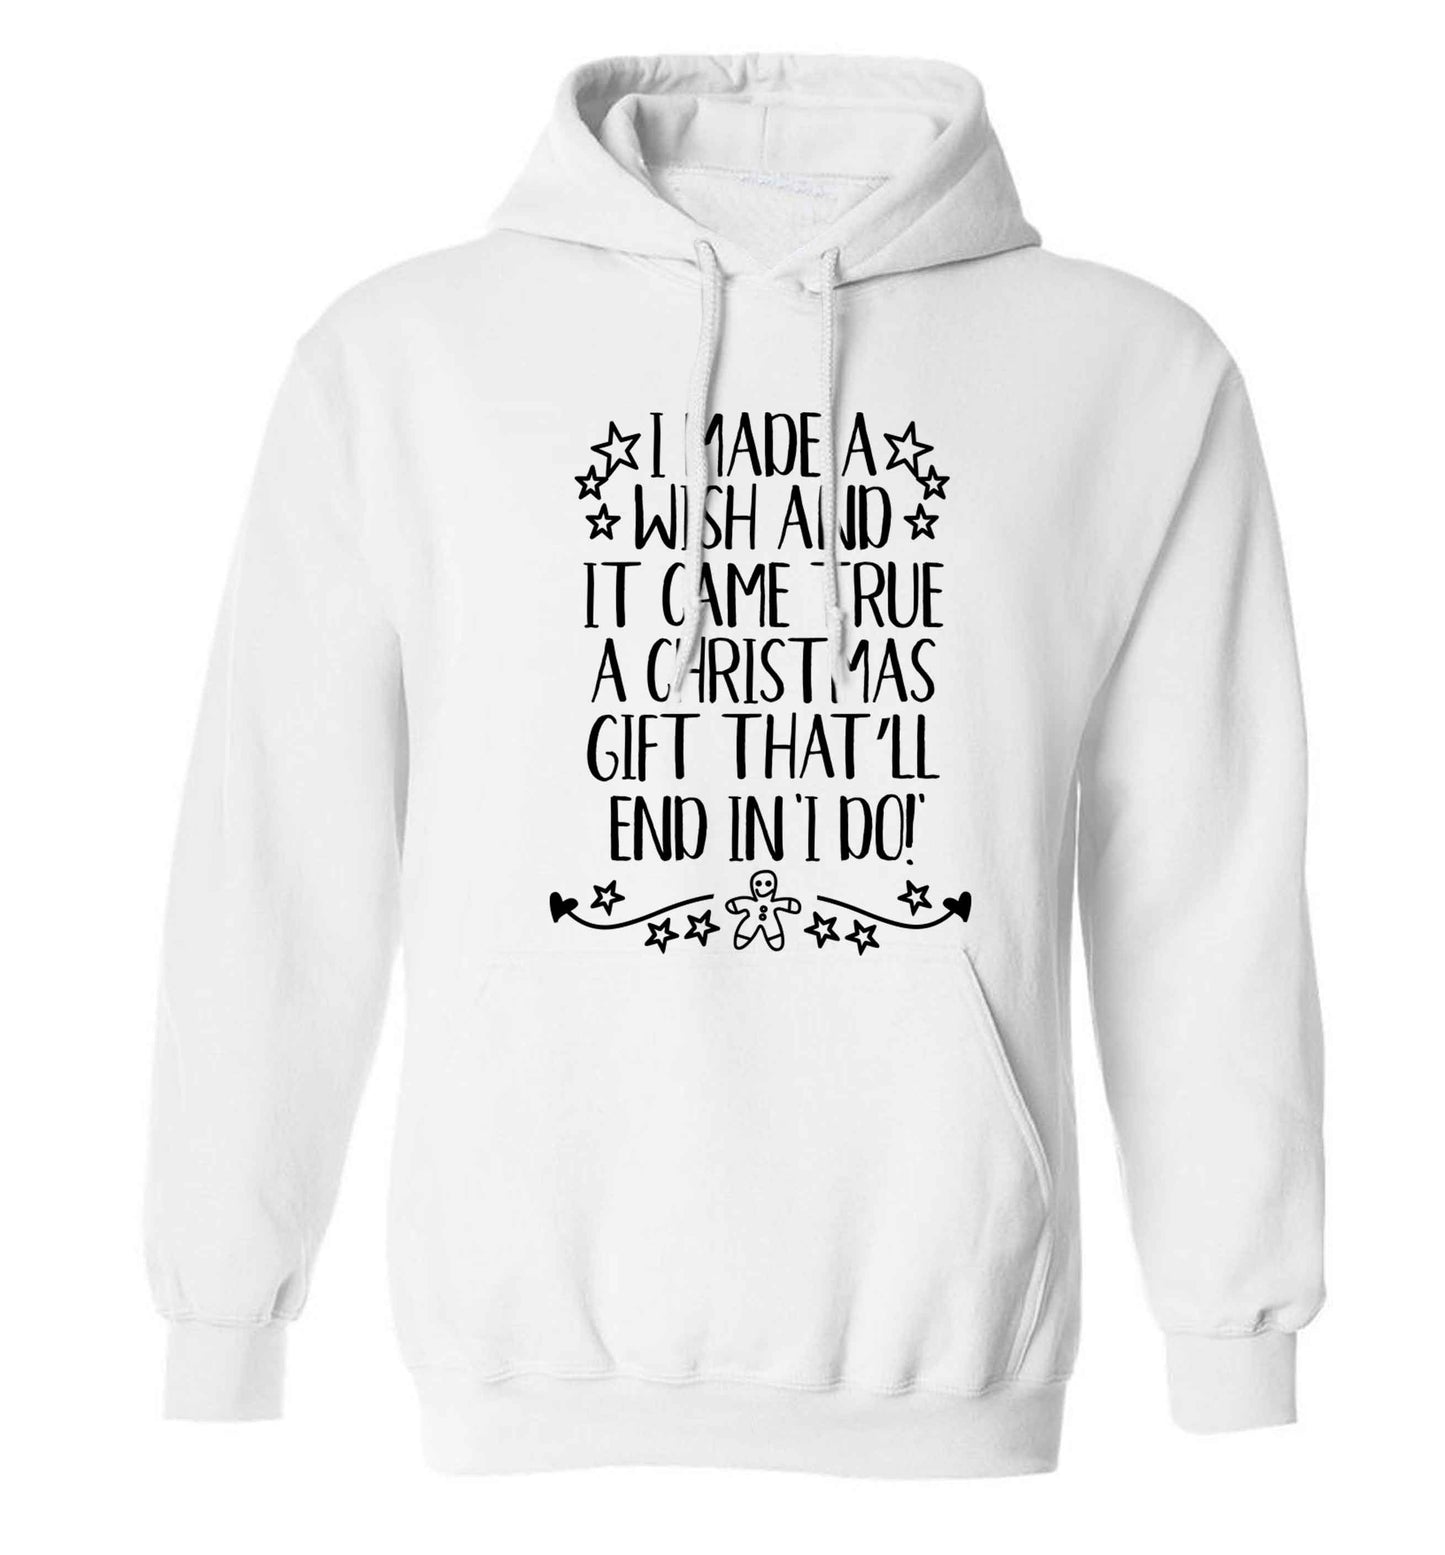 I made a wish and it came true a Christmas gift that'll end in 'I do' adults unisex white hoodie 2XL